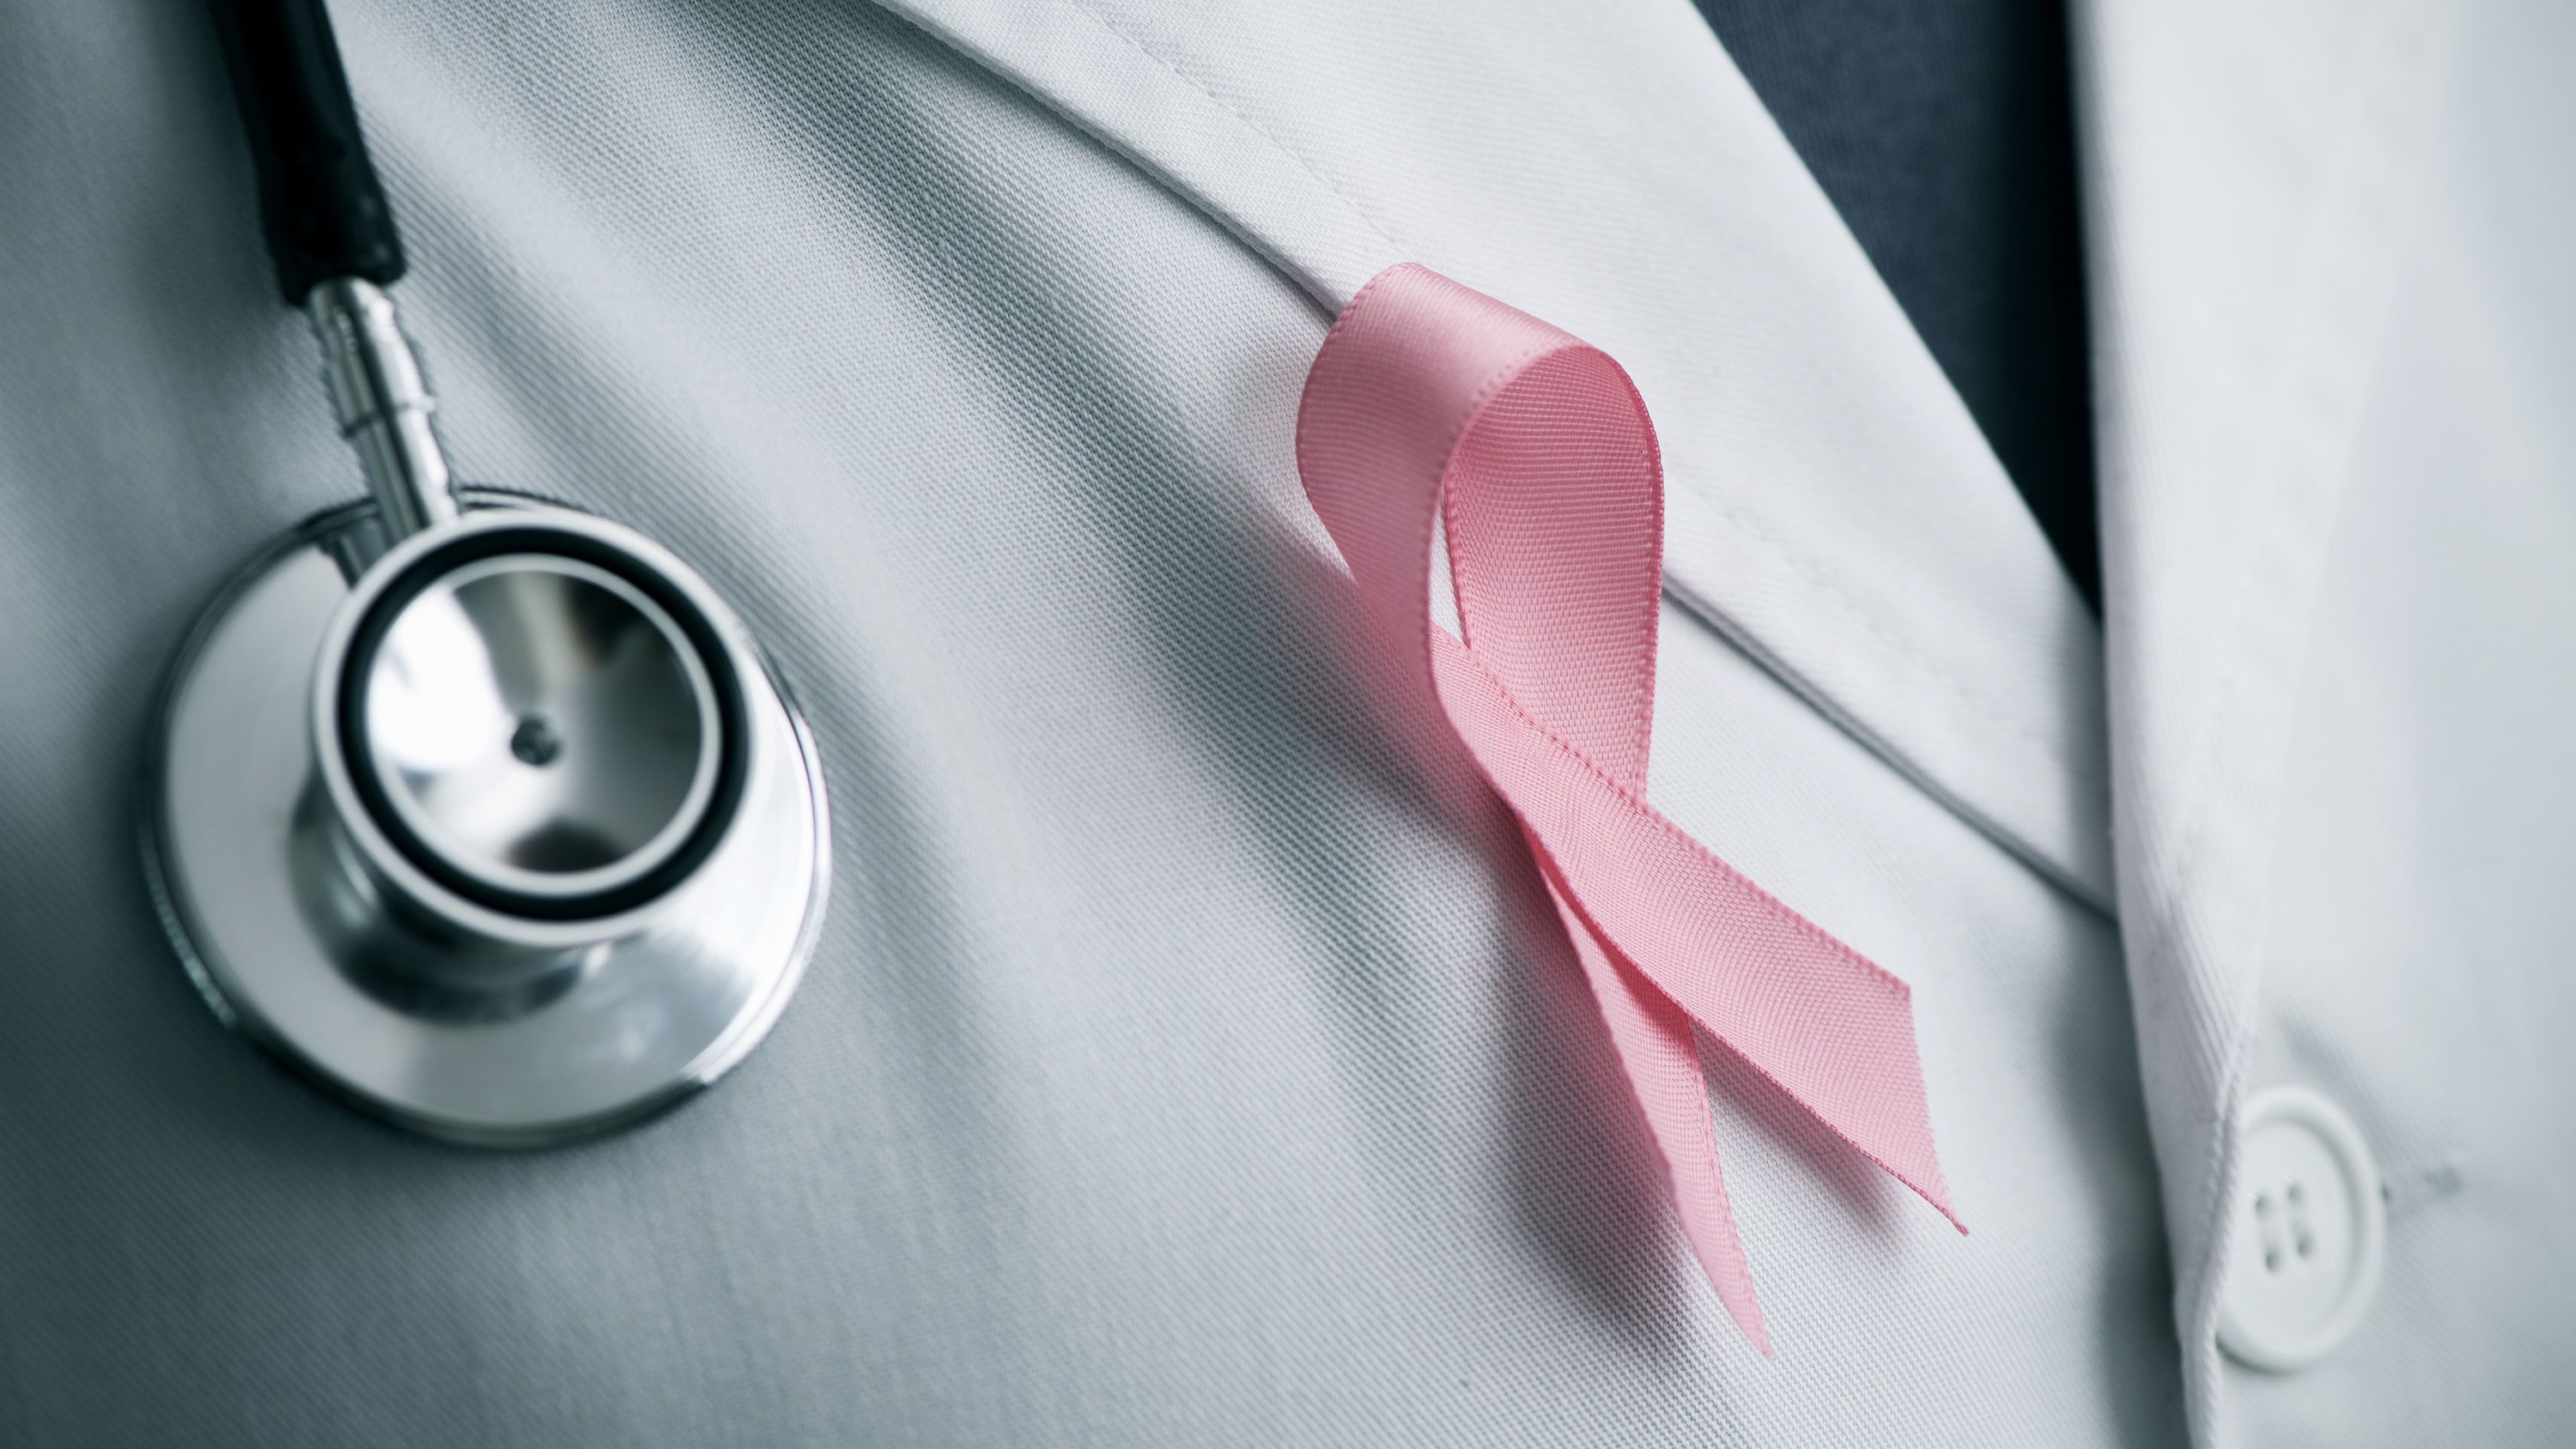 Many women underestimate breast density as a risk factor for breast cancer,  study shows